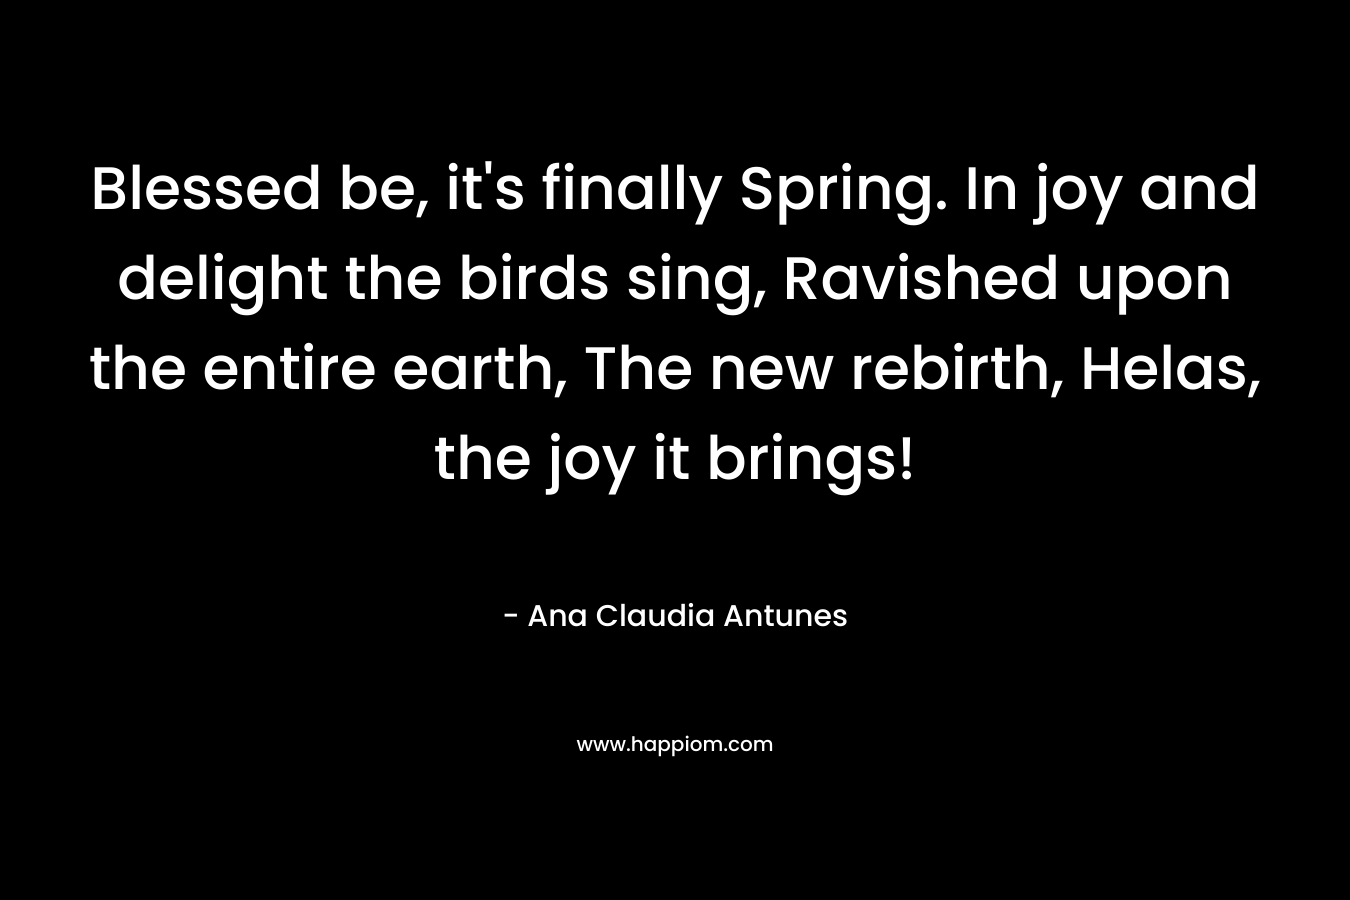 Blessed be, it's finally Spring. In joy and delight the birds sing, Ravished upon the entire earth, The new rebirth, Helas, the joy it brings!